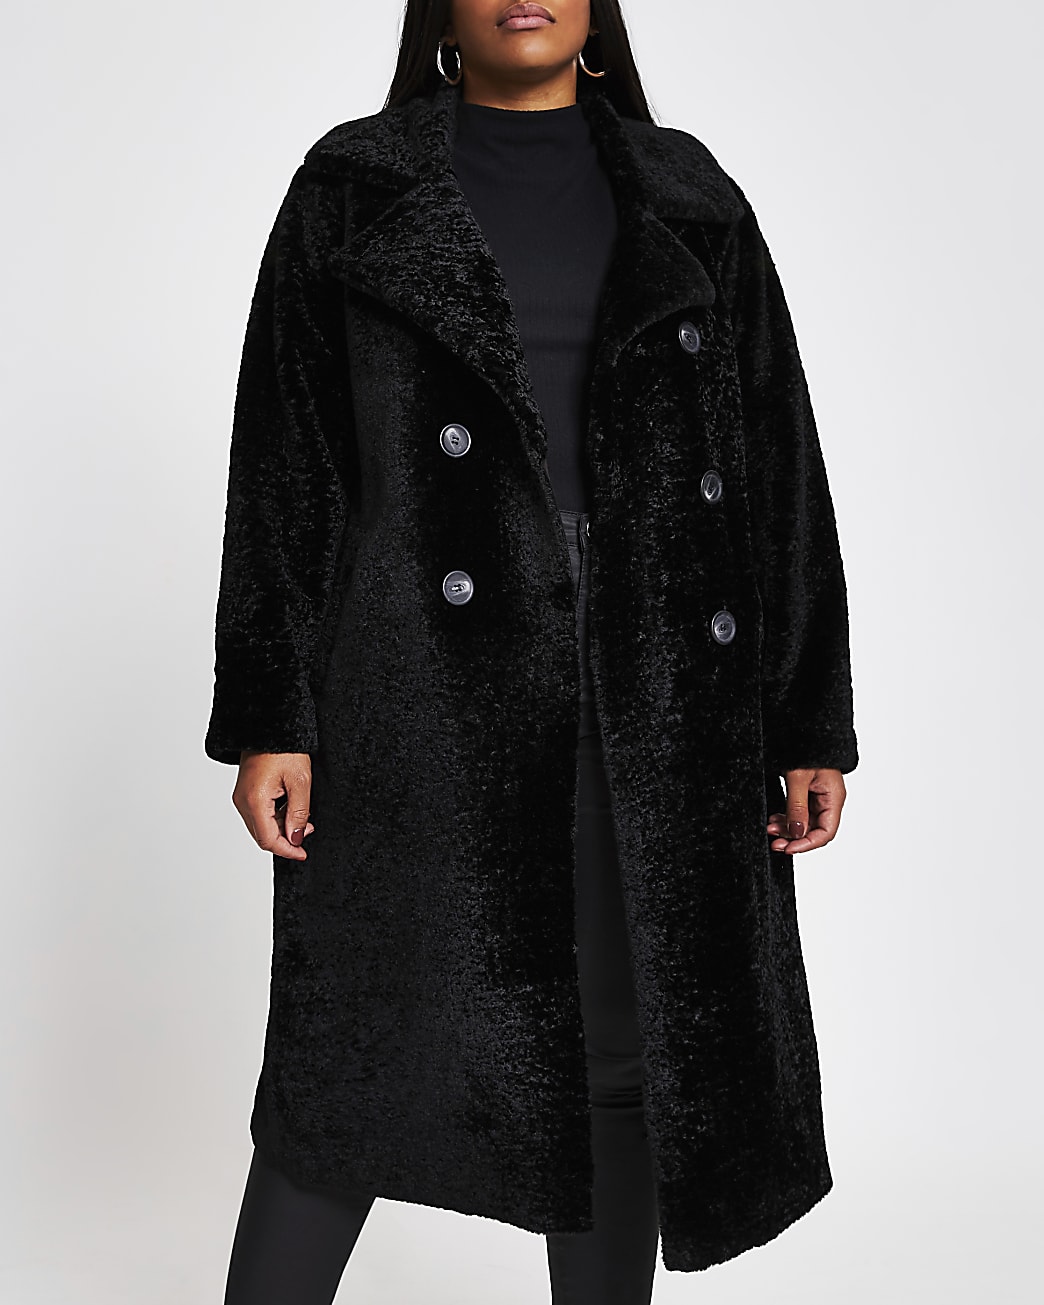 Plus black shearling double breasted coat